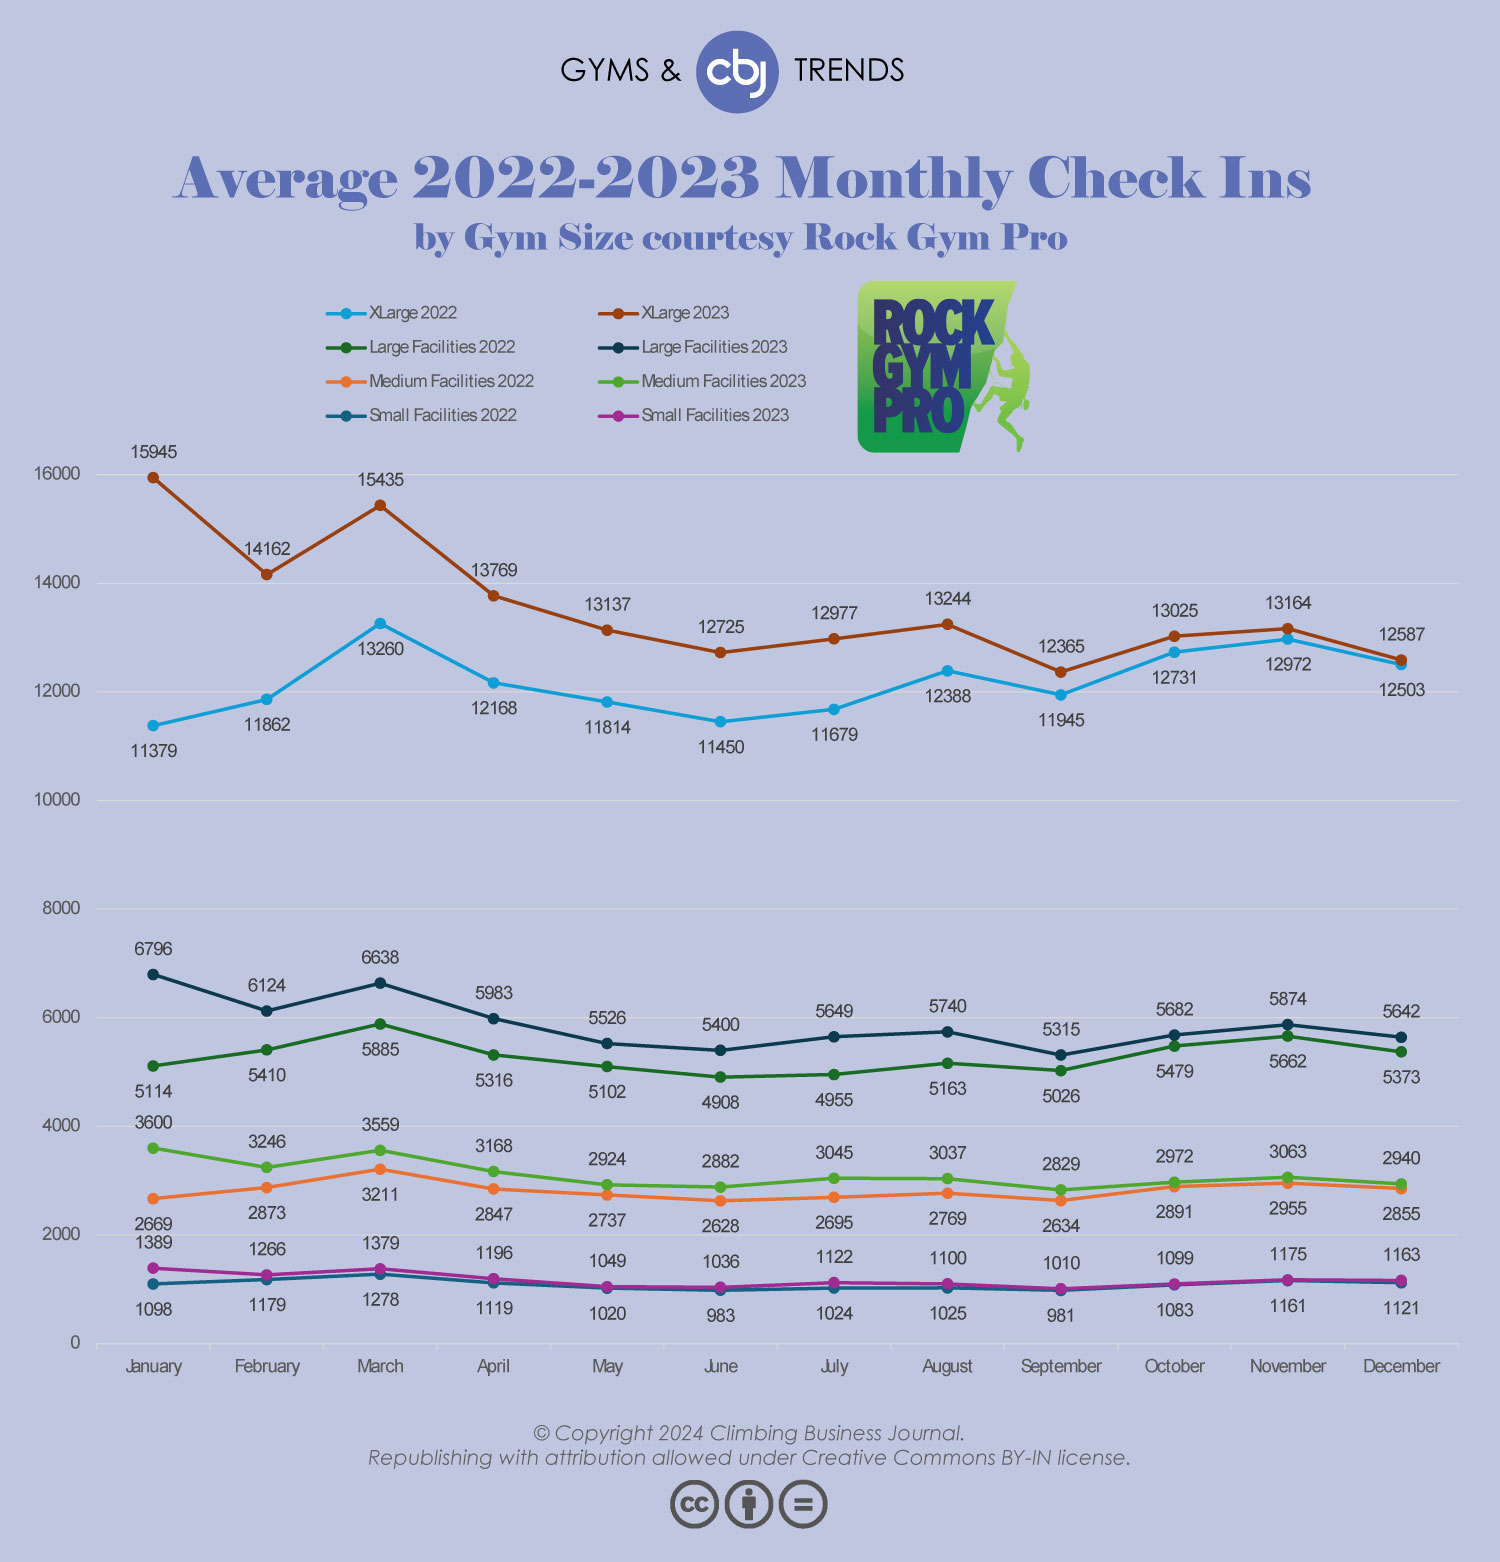 CBJ Gyms and Trends 2023 Average Monthly Check Ins courtesy Rock Gym Pro